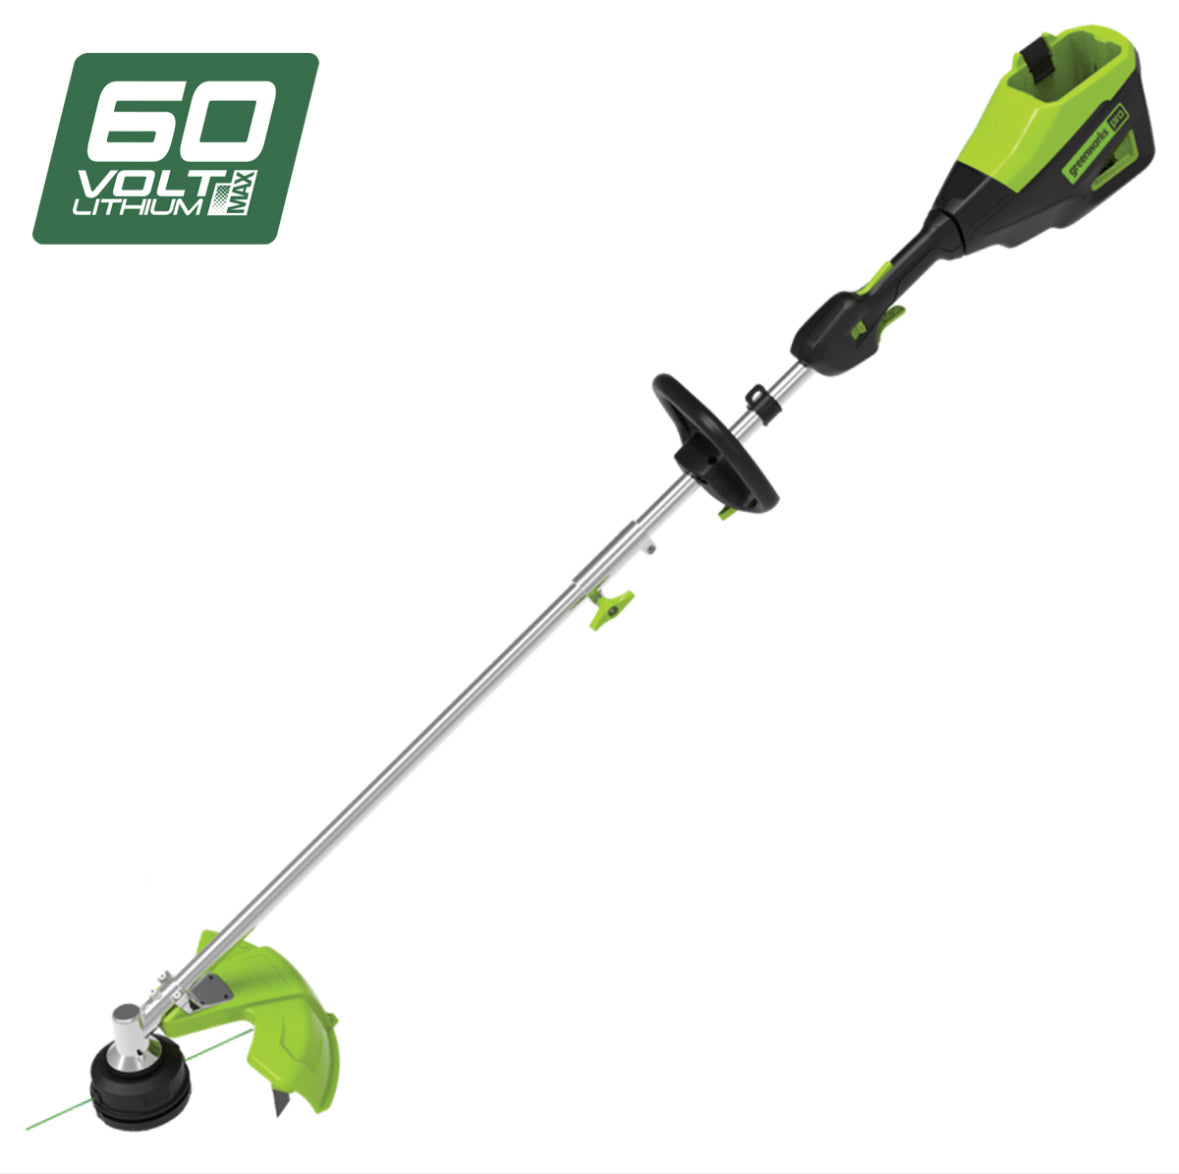 Greenworks 60V 46cm SP Mower + Blower + Multi Tool + Pole Saw/Hedge Trimmer attach 1×4.0Ah Battery + Charger Kit - 0